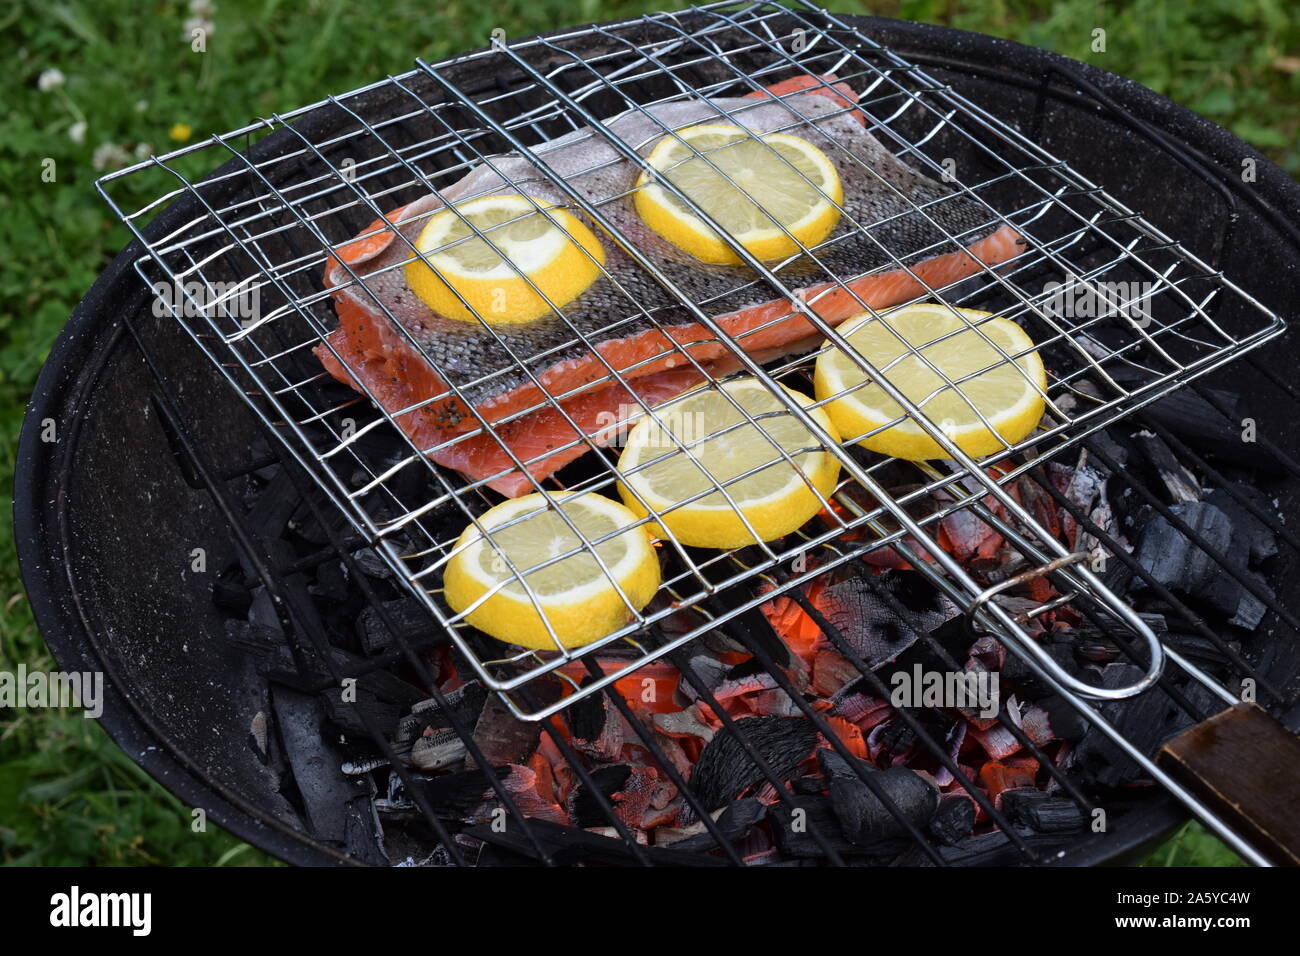 Grilling salmon with lemon slices on round charcoal grill with gridiron. Hot glowing embers under fish. Stock Photo